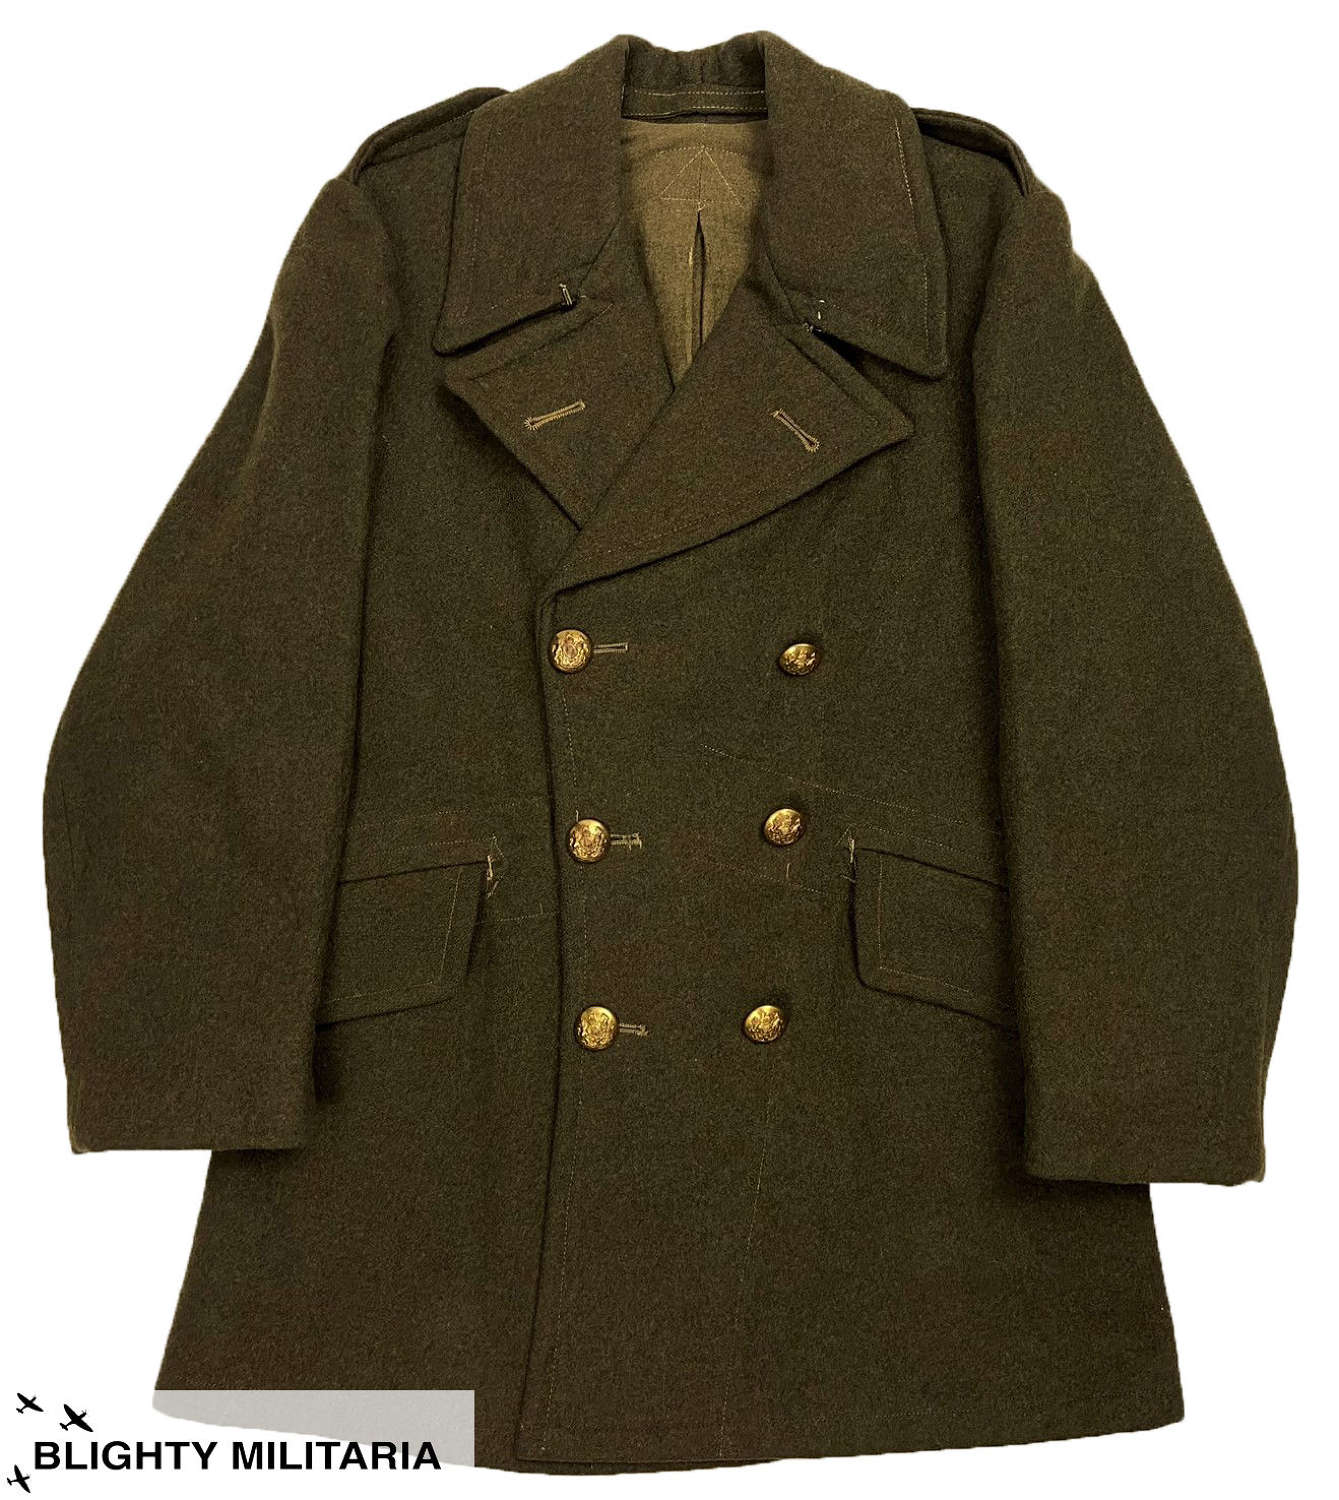 Original 1943 Dated British Army Greatcoat, Size 1 - Converted